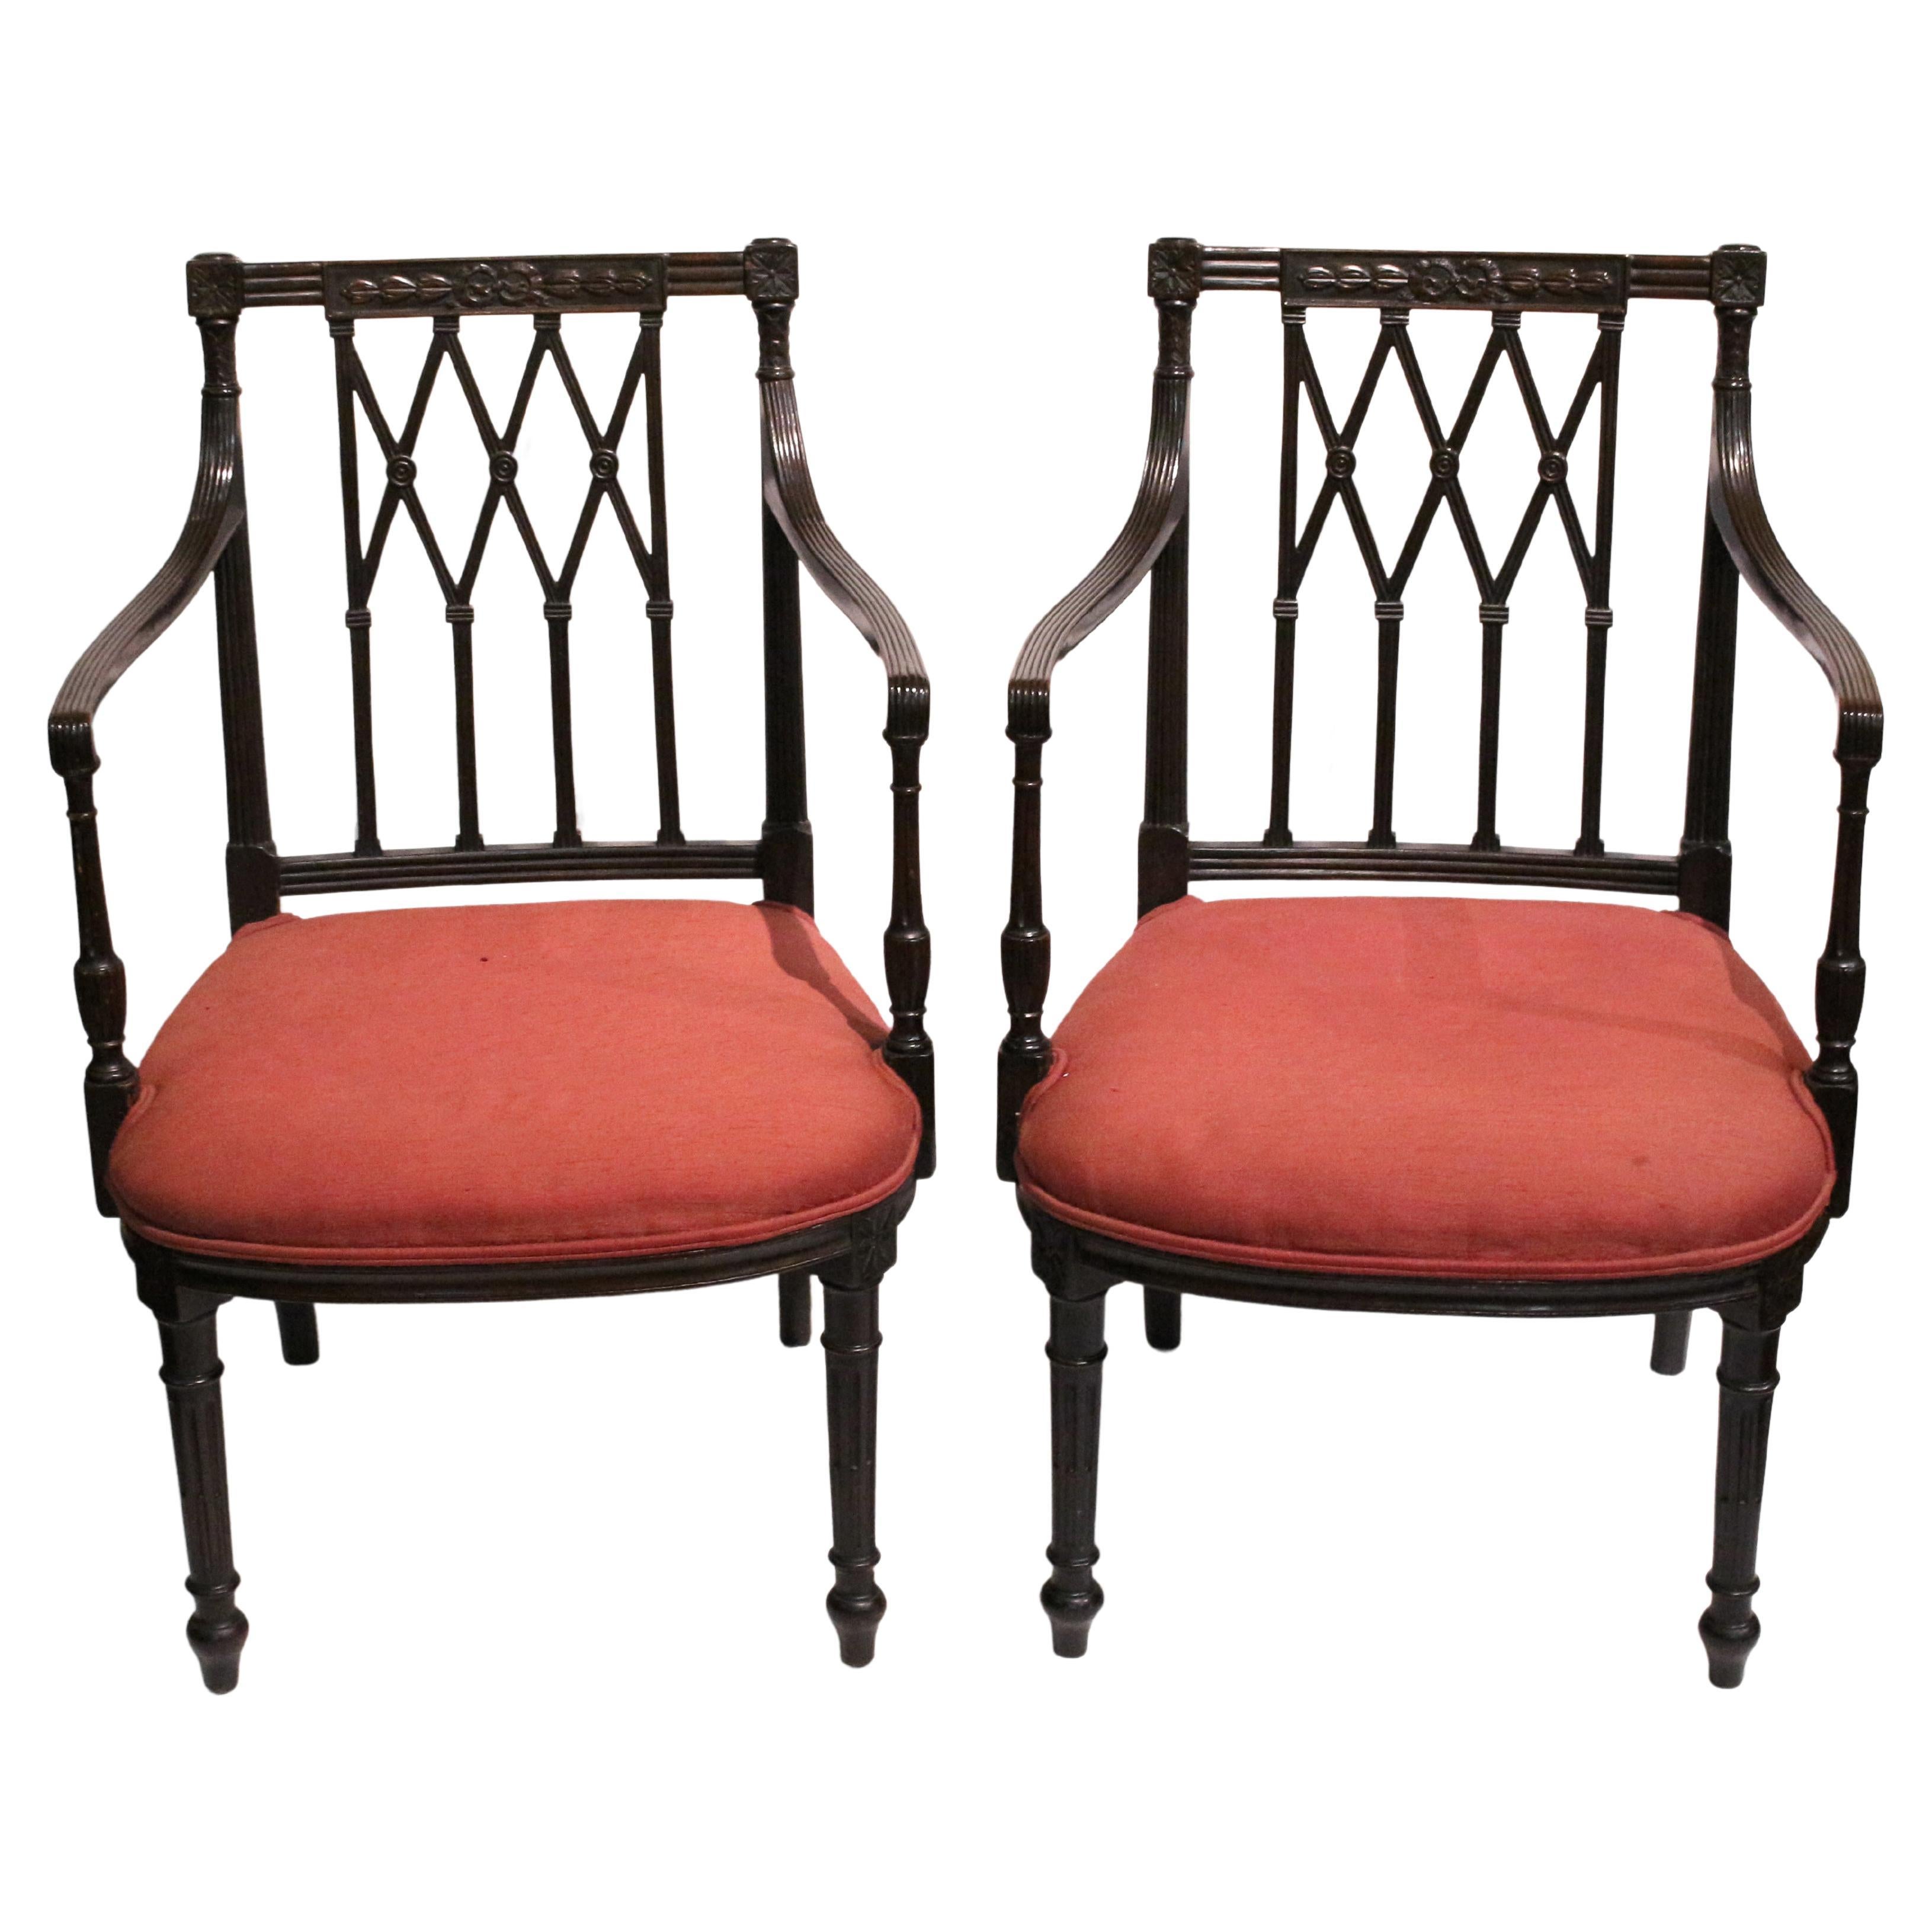 Pair of Mid-19th Century Classical English Arm Chairs